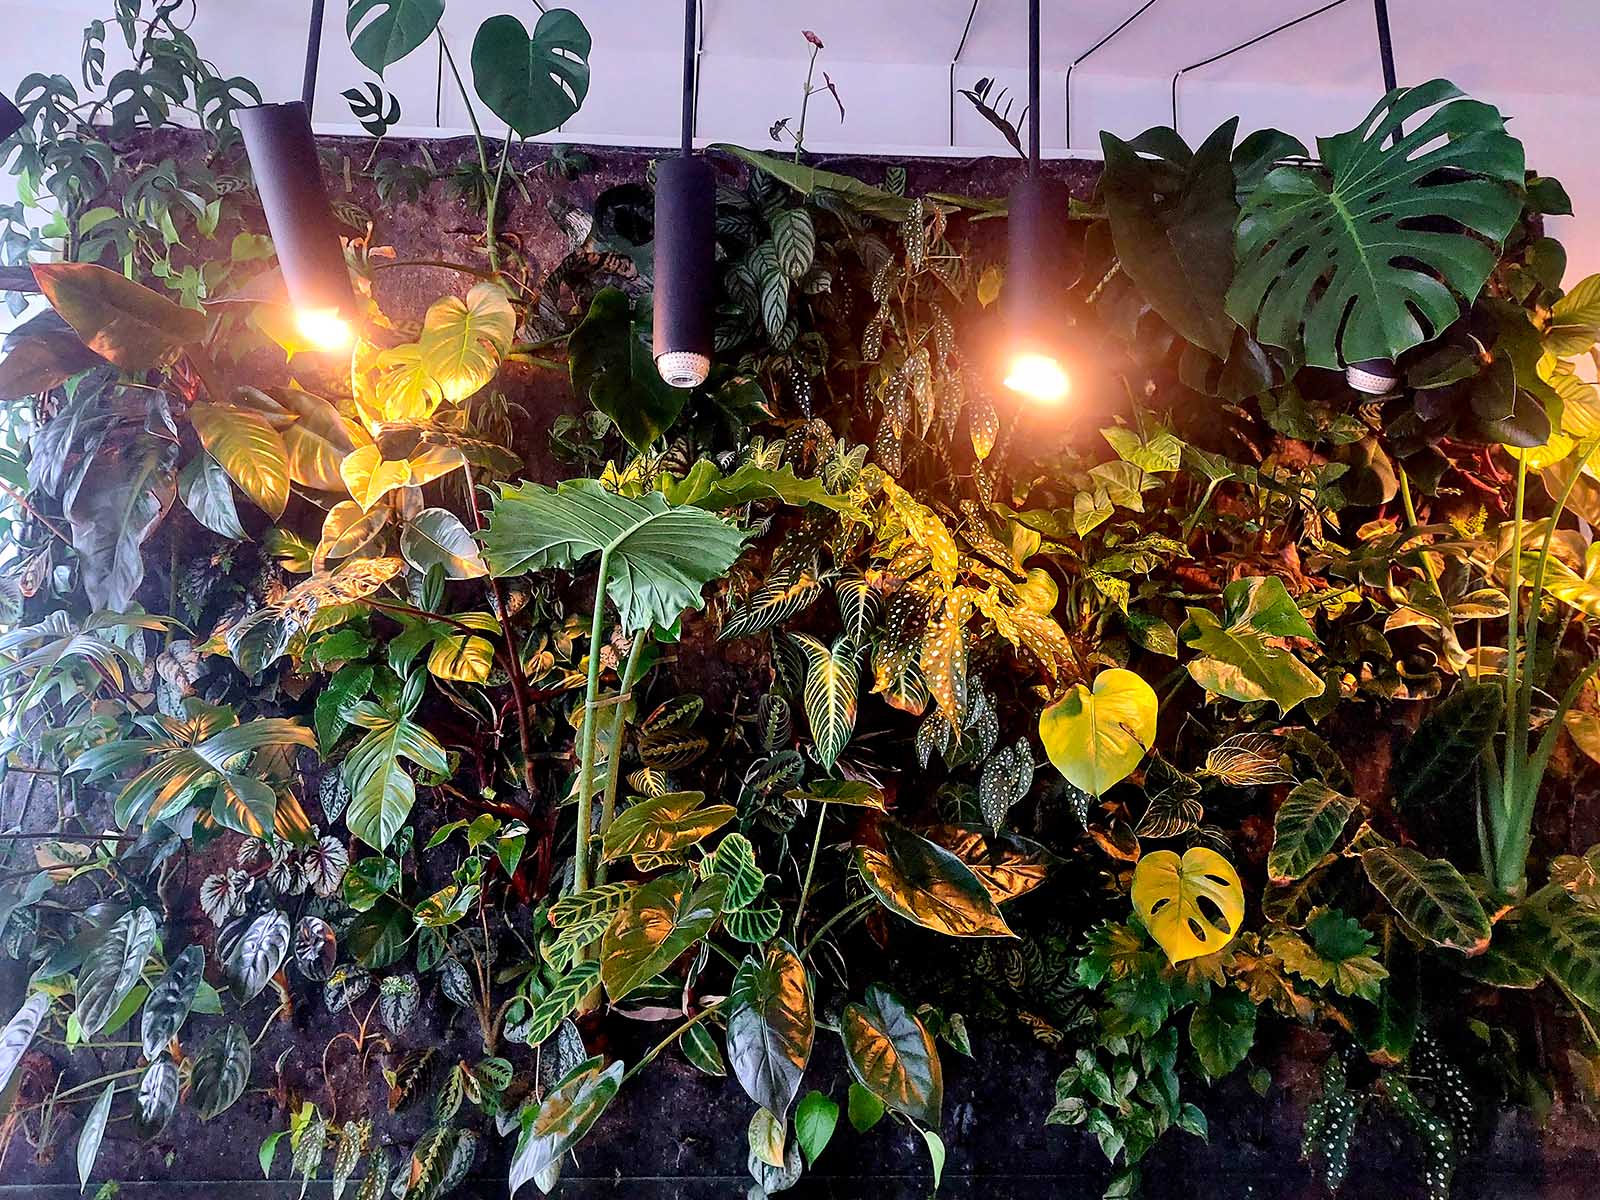 Plant Ambient - The Living Wall as a Statement Piece